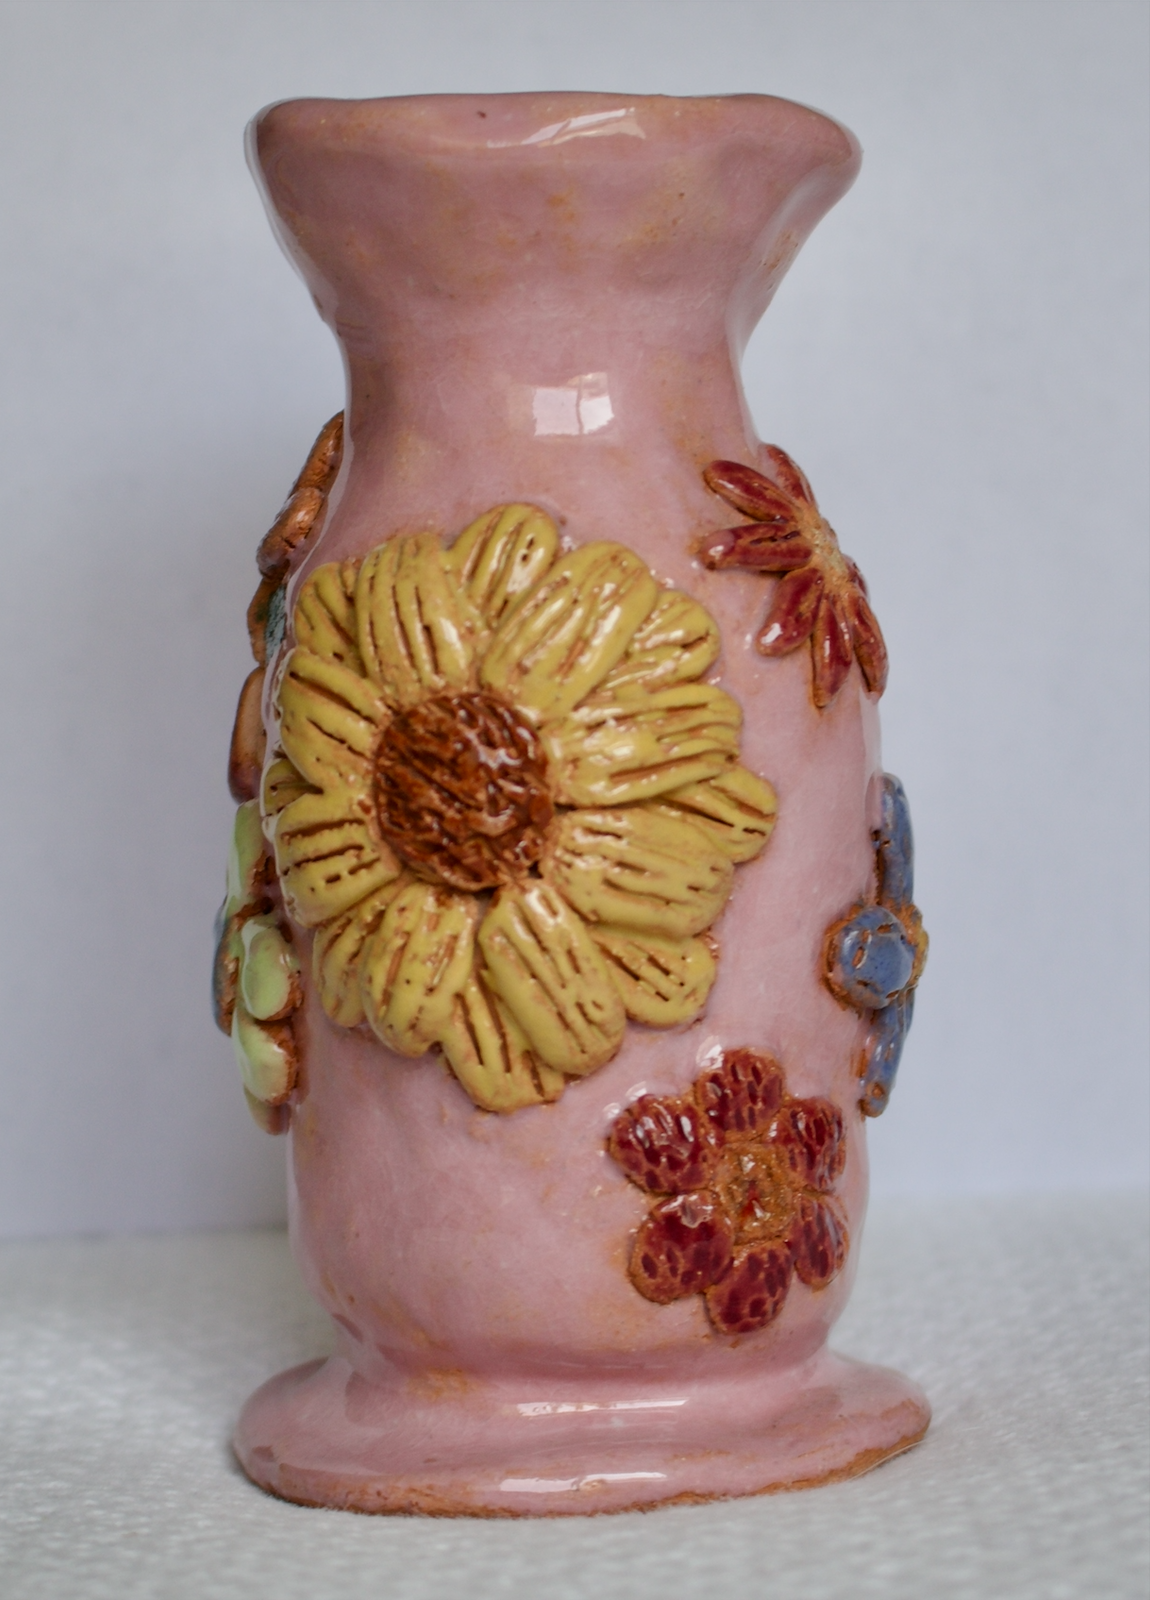 A pink ceramic flower vase with a ceramic flowers texture.